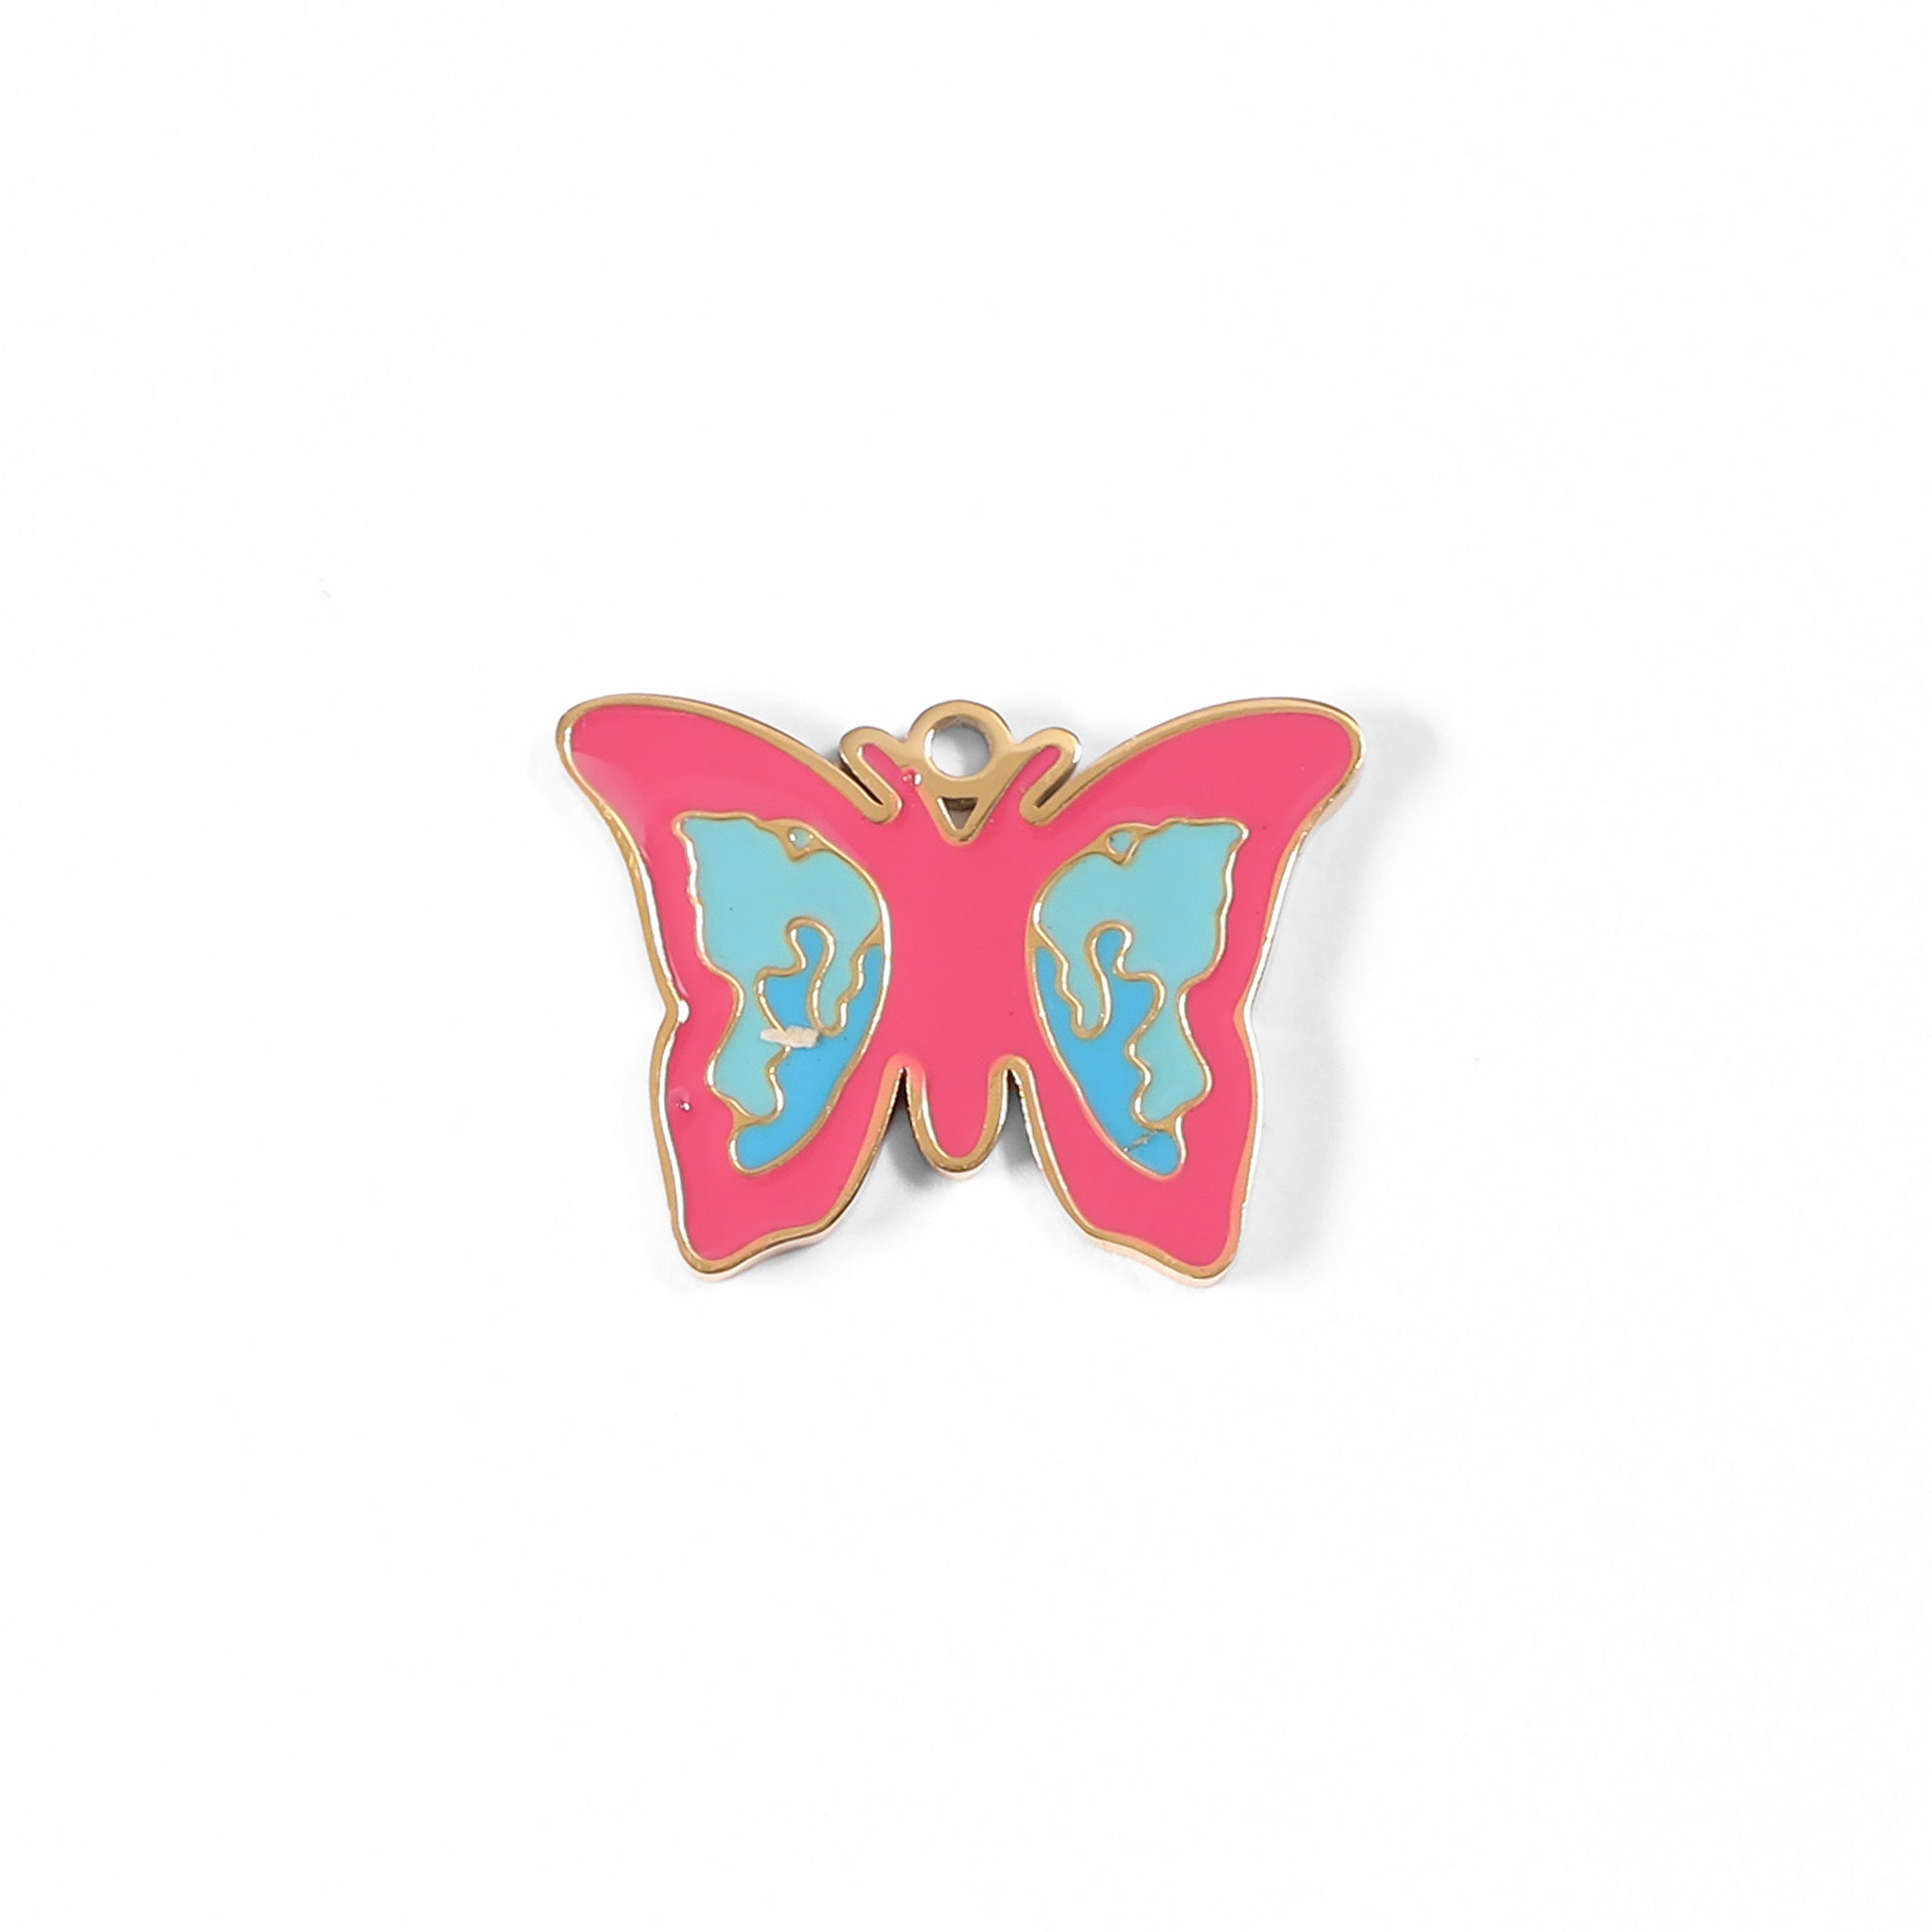 Stainless Steel Epoxy Pink and Blue Butterfly Charm / PDL0004